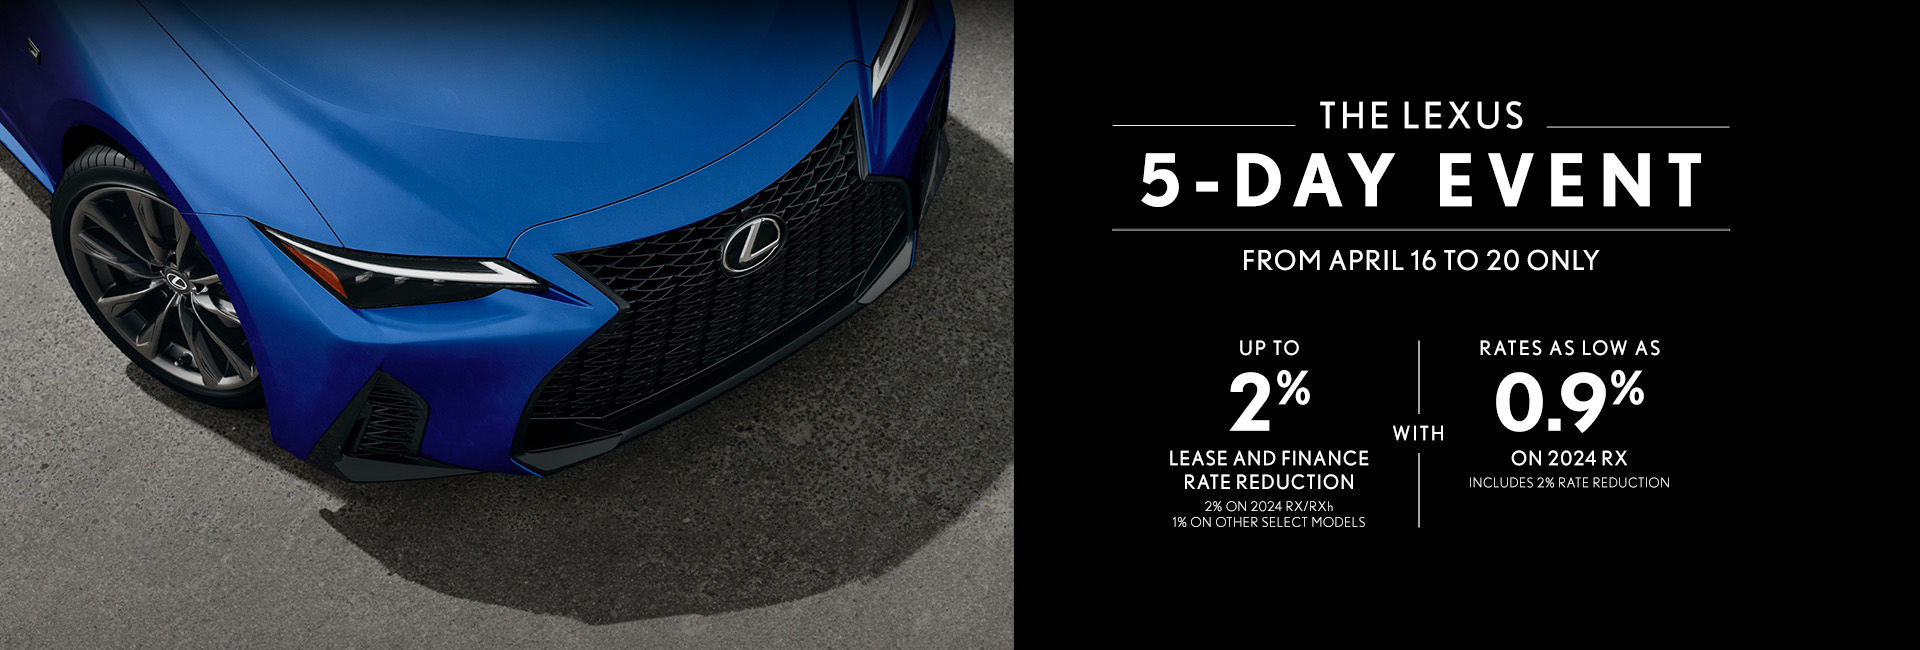 THE LEXUS 5-DAY EVENT FROM APRIL 16 TO 20 ONLY